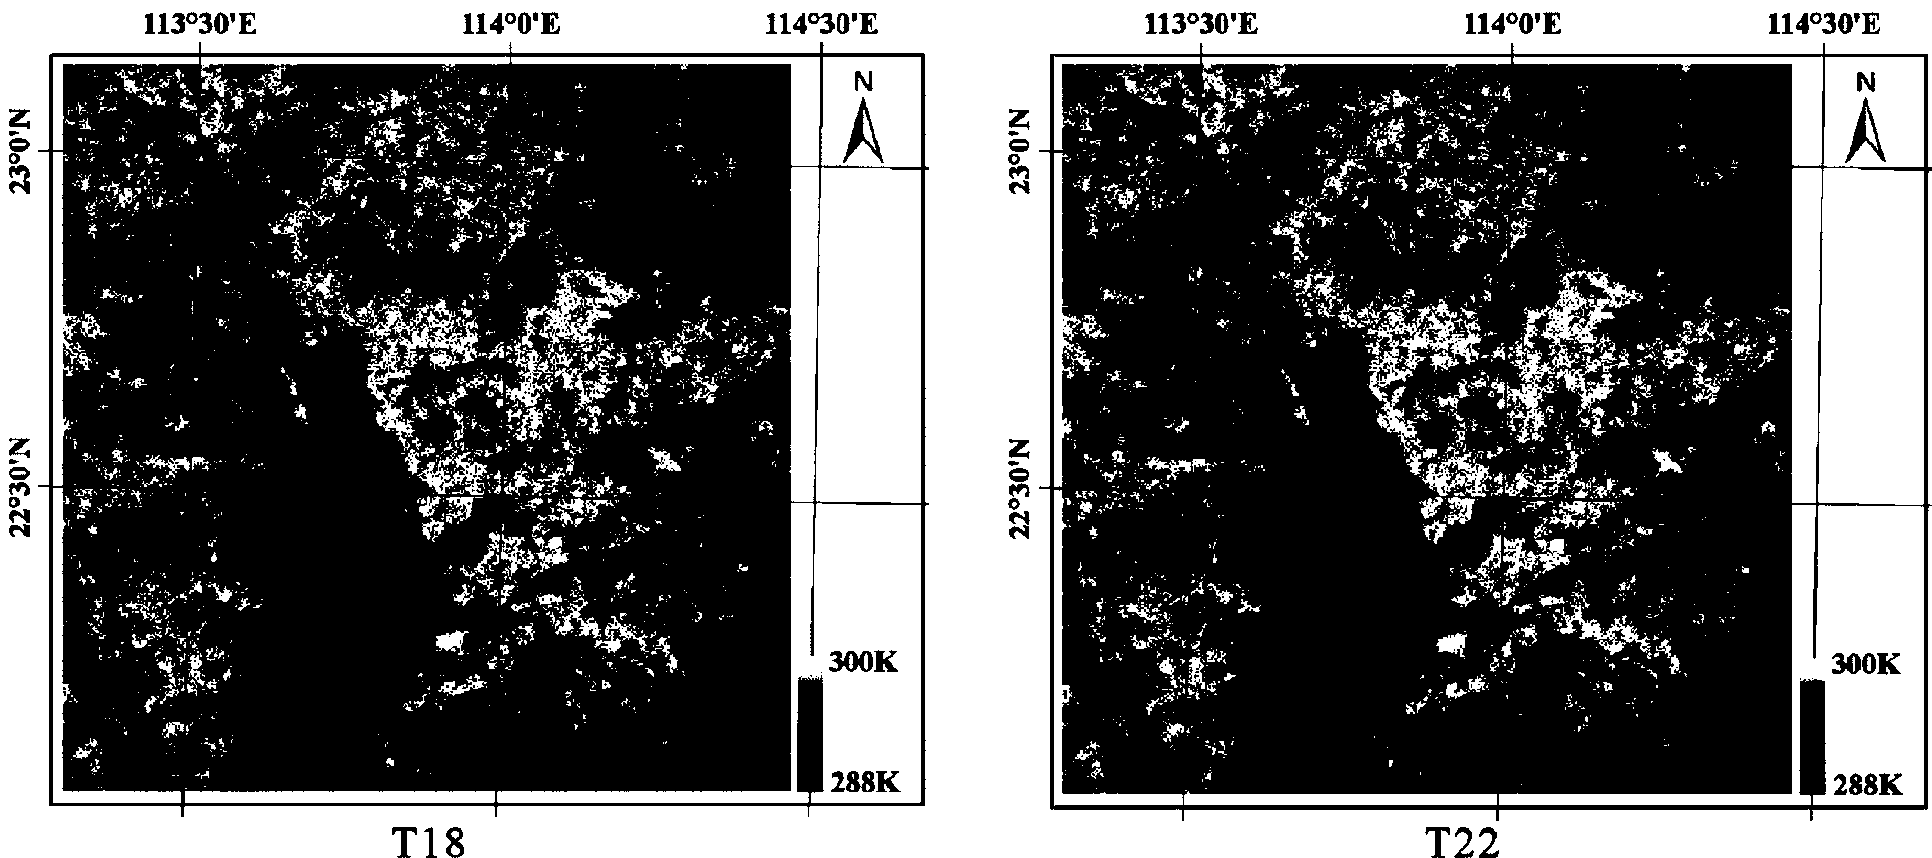 Land surface temperature inversion method based on spatio-temporal information of paired HJ-1B images